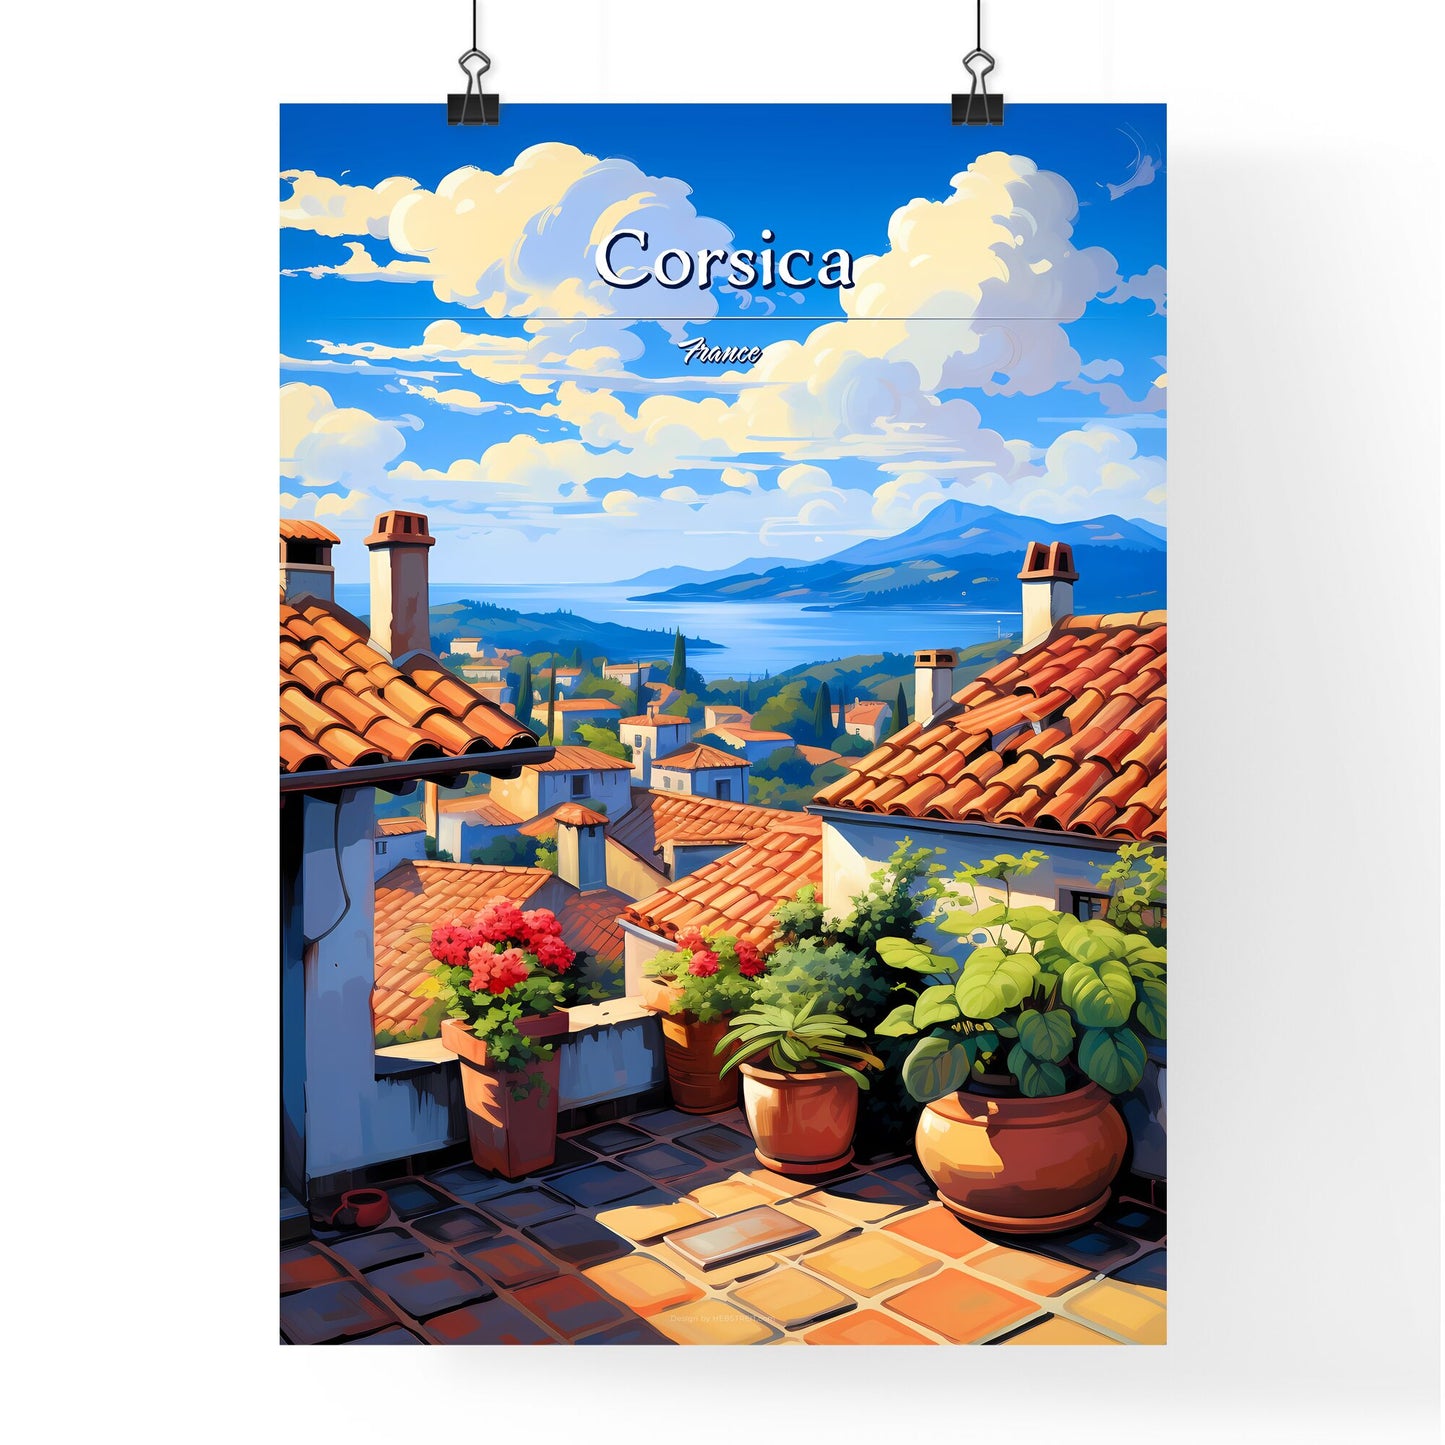 On the roofs of Corsica, France - Art print of a rooftop of a town with potted plants and a view of the water Default Title